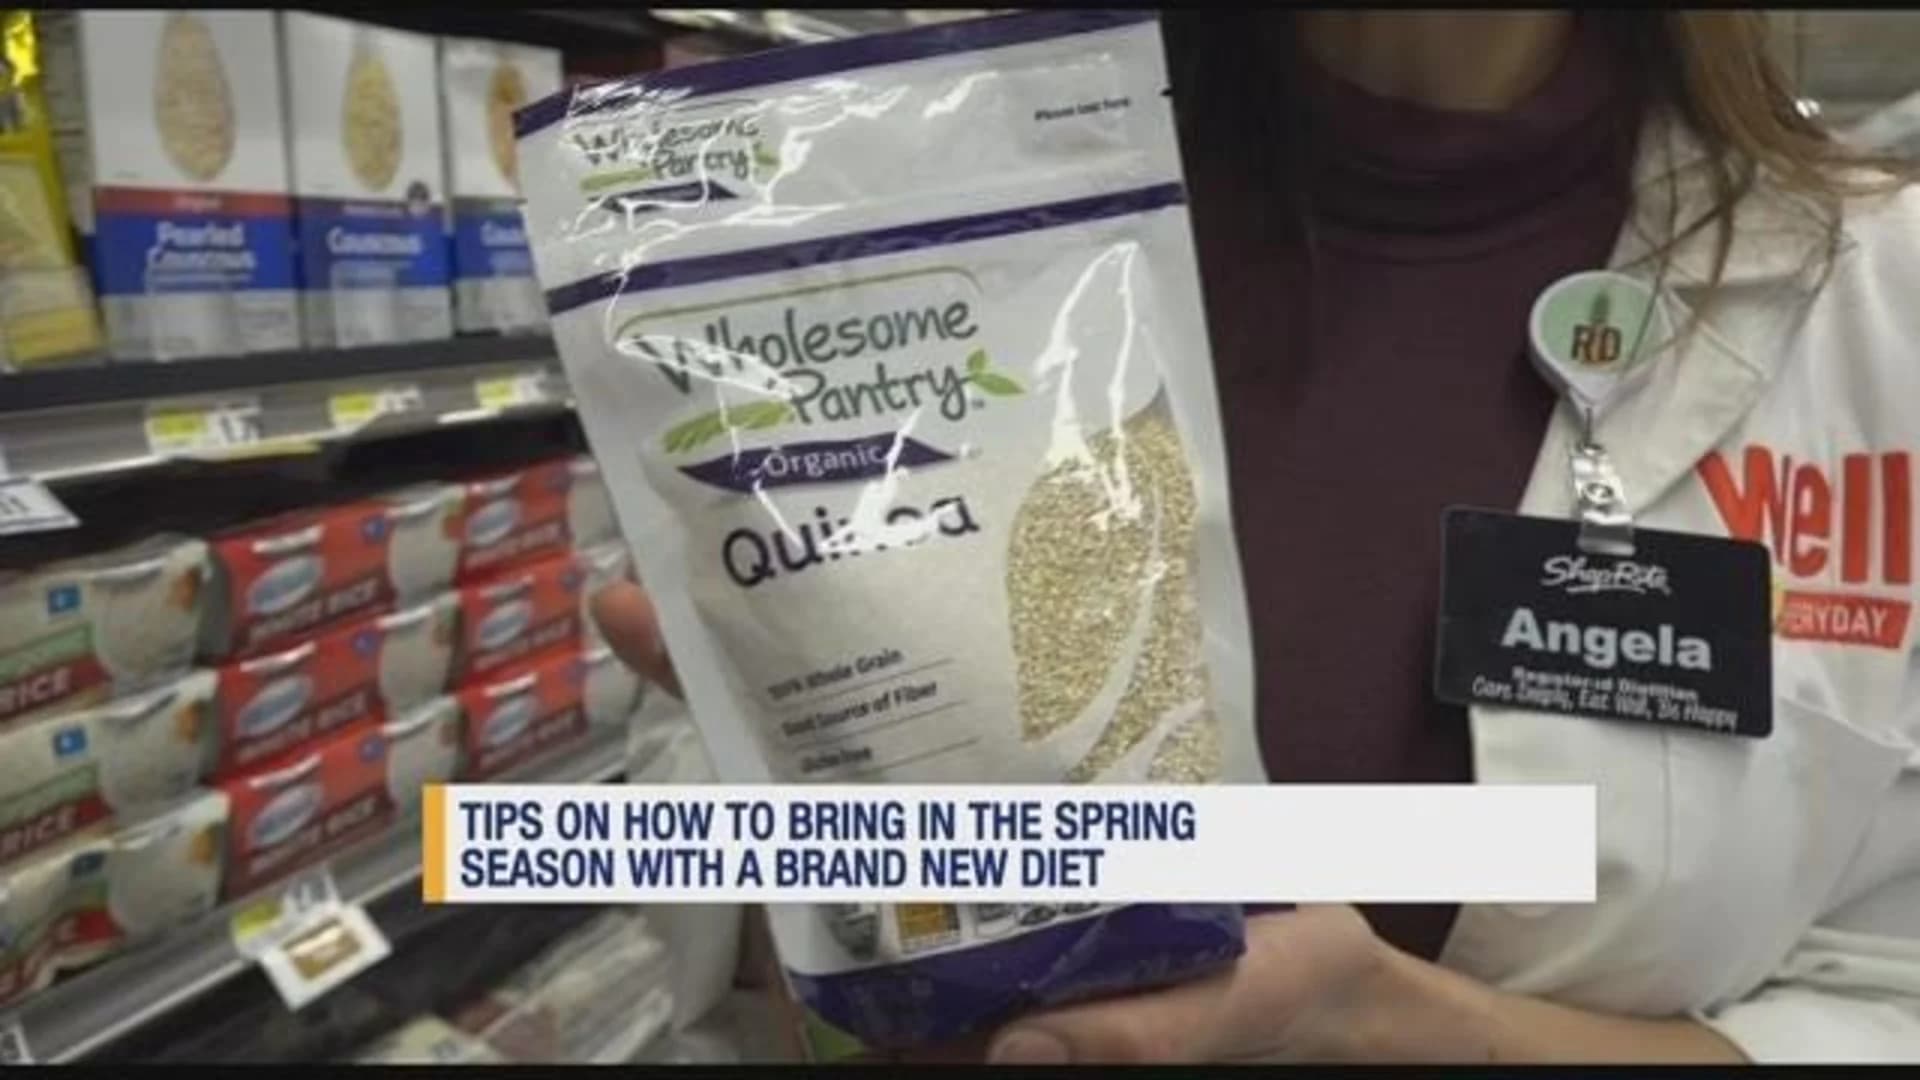 Registered dietitian gives tips on how to bring in spring with brand-new diet